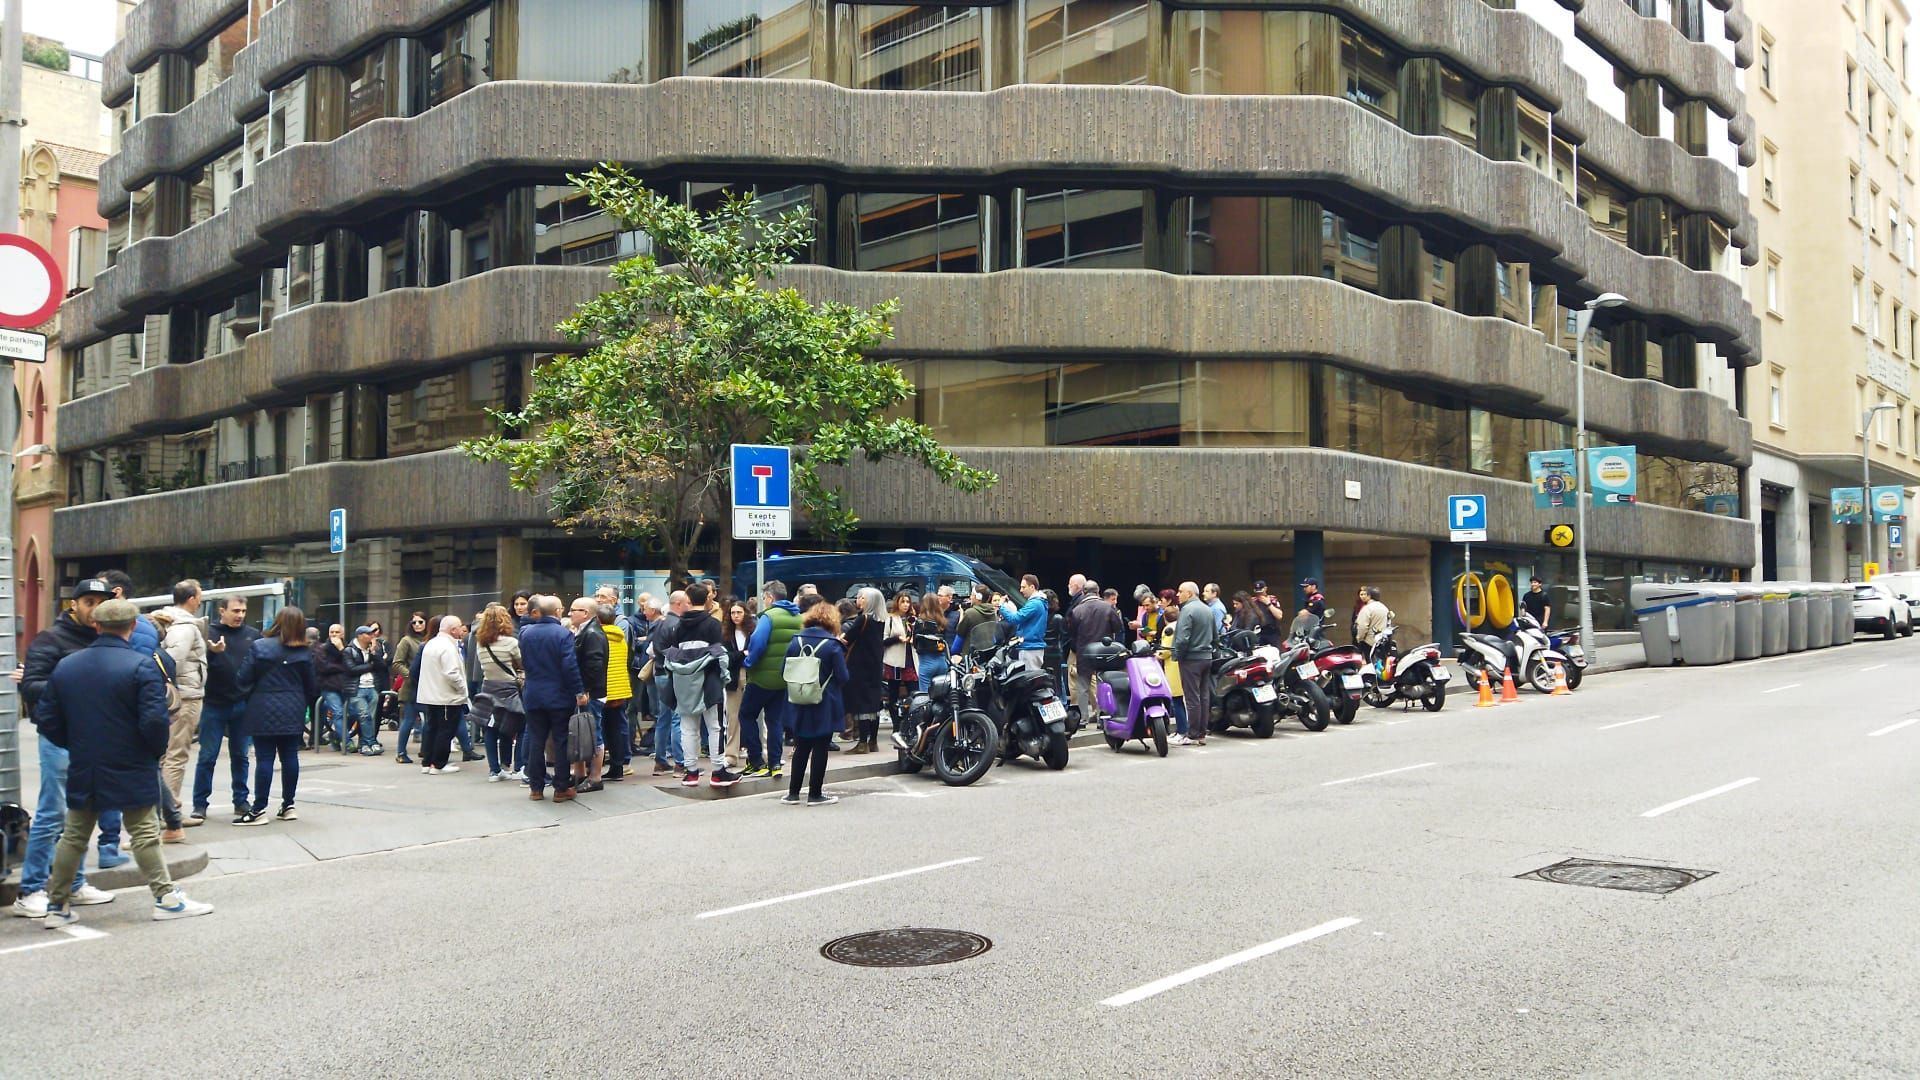 They protest in Barcelona for the “inefficiency” of the Italian consulate